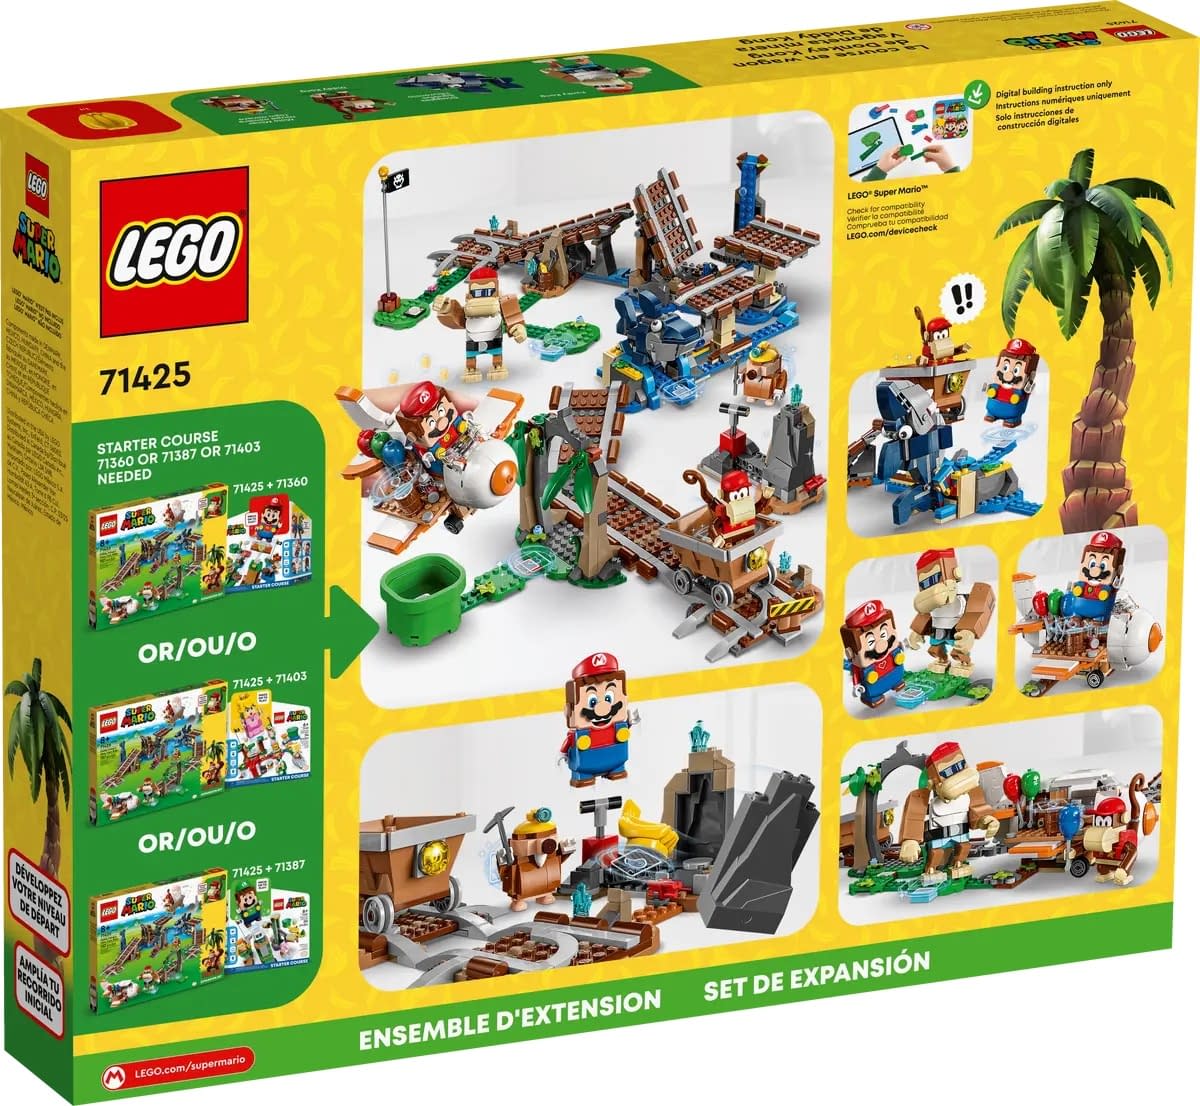 Enter Diddy Kong's Mine LEGO's Newest Super Mario Expansion Set 